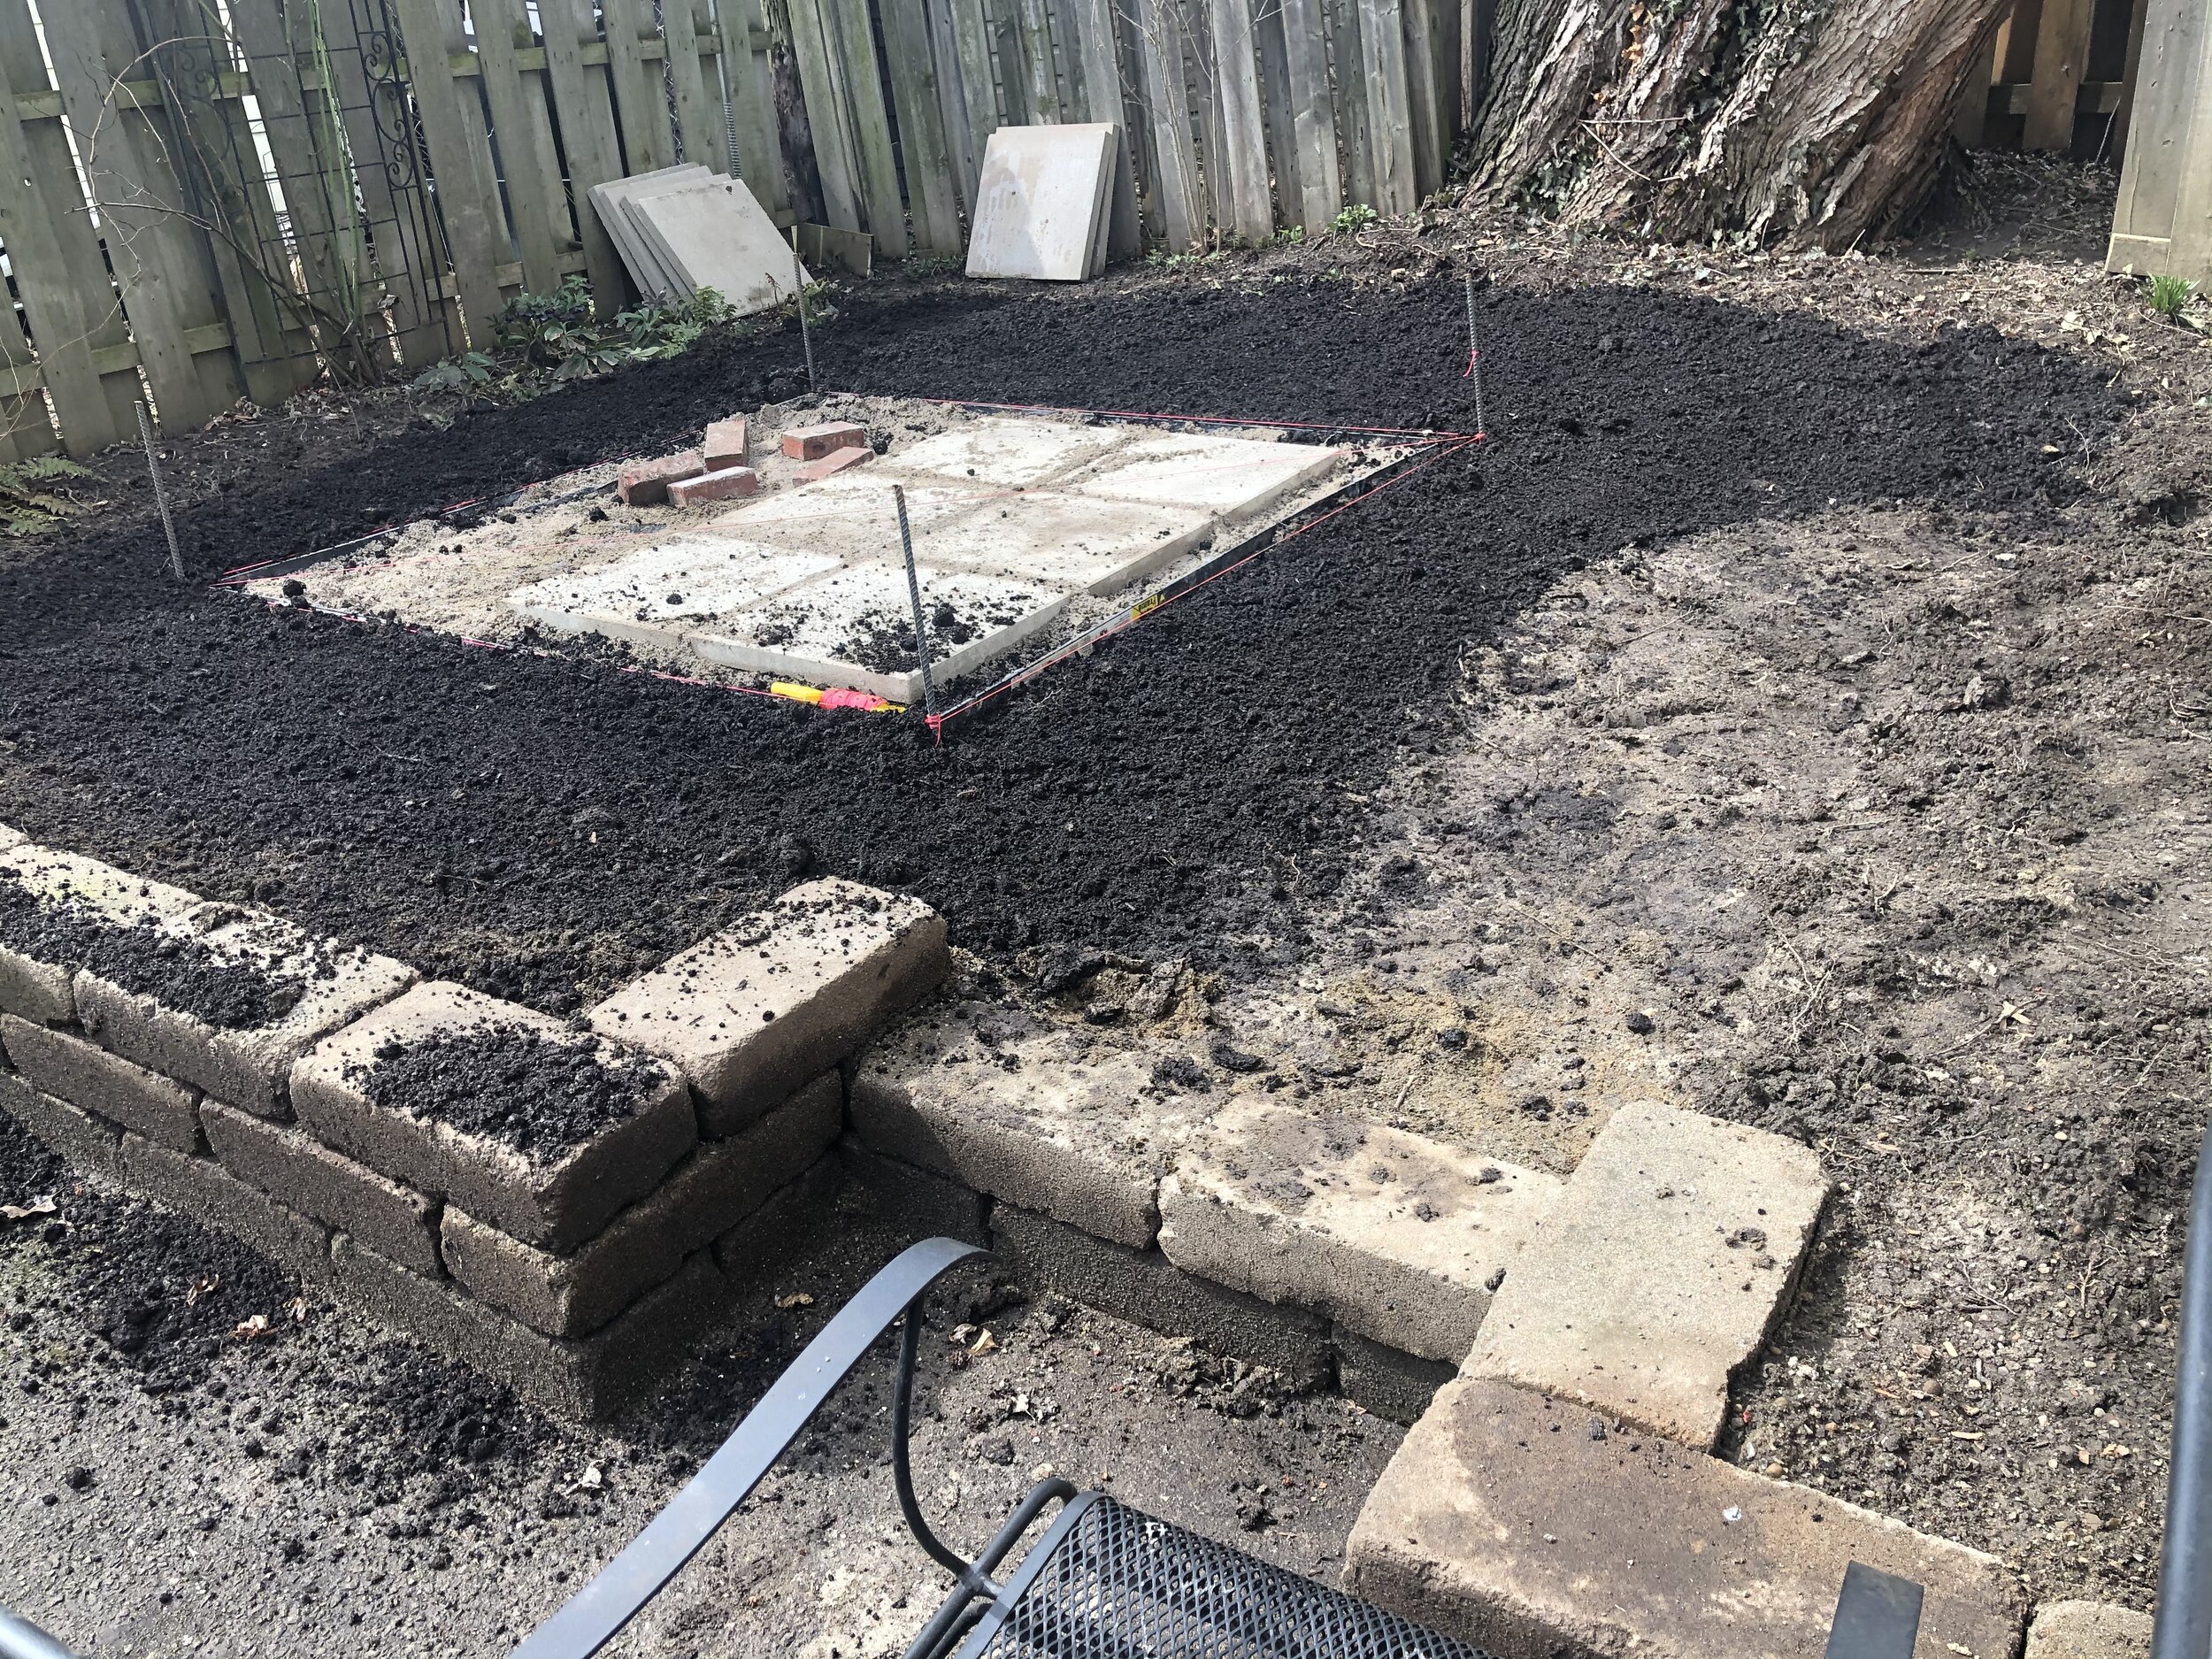  We ensured all of the paver joints were uniform and tight before we finished things off with repurposed bricks saved from another area of the landscape. 